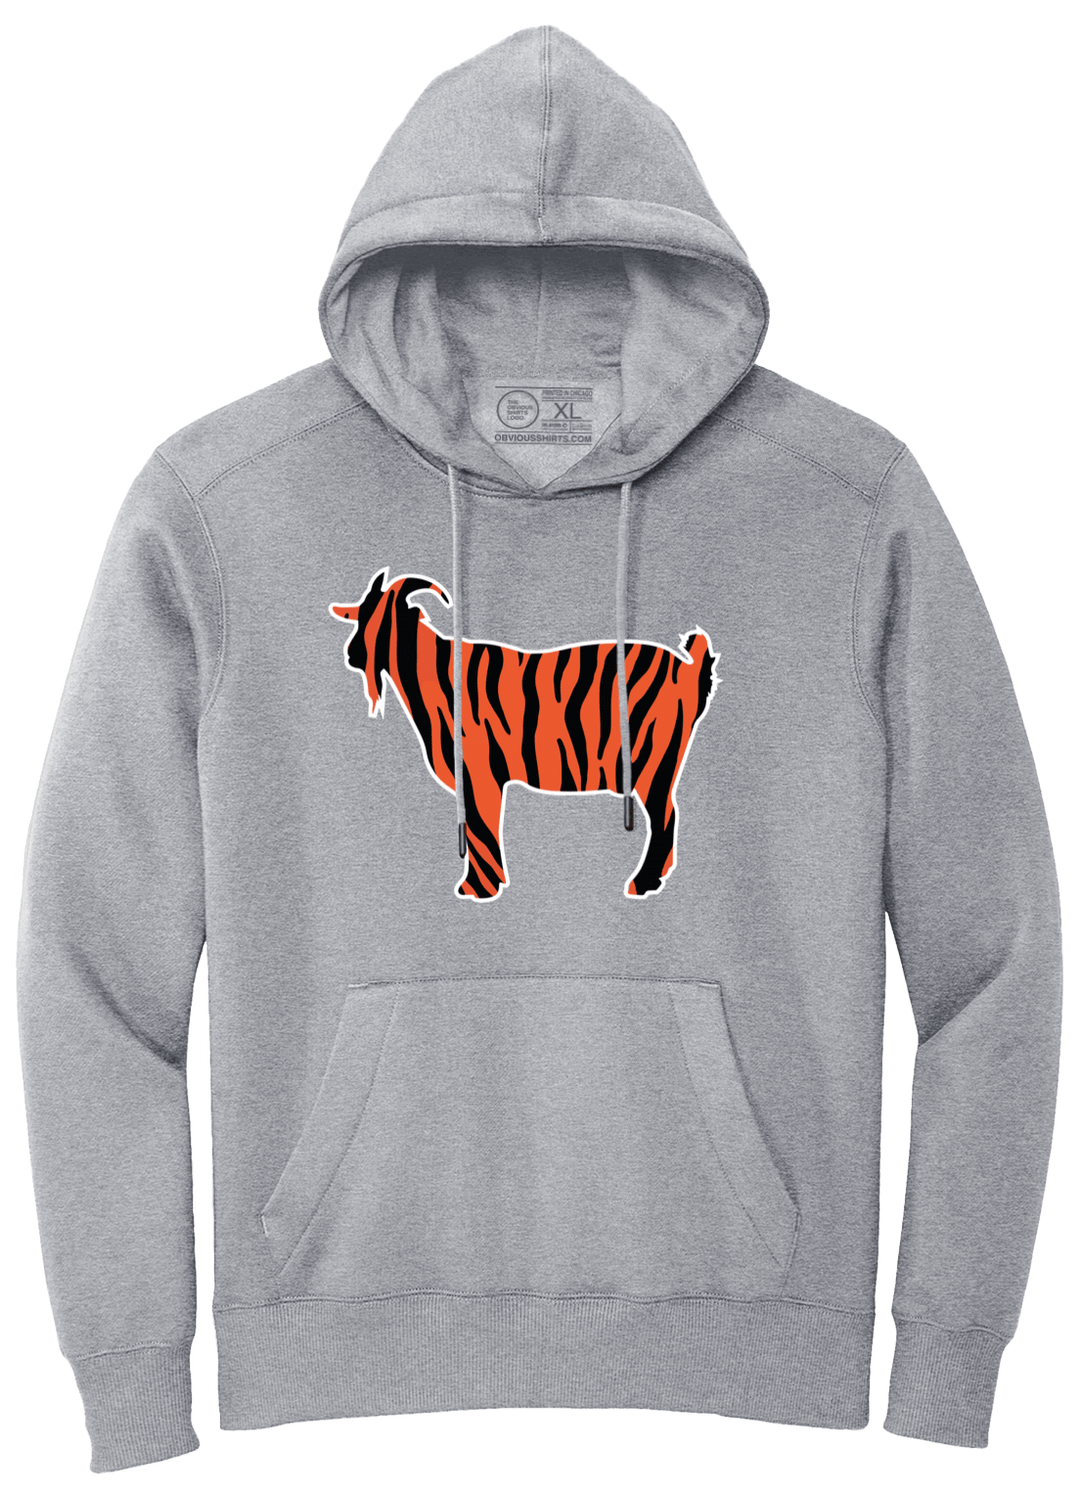 THE TIGER GOAT. (HOODED SWEATSHIRT) - OBVIOUS SHIRTS